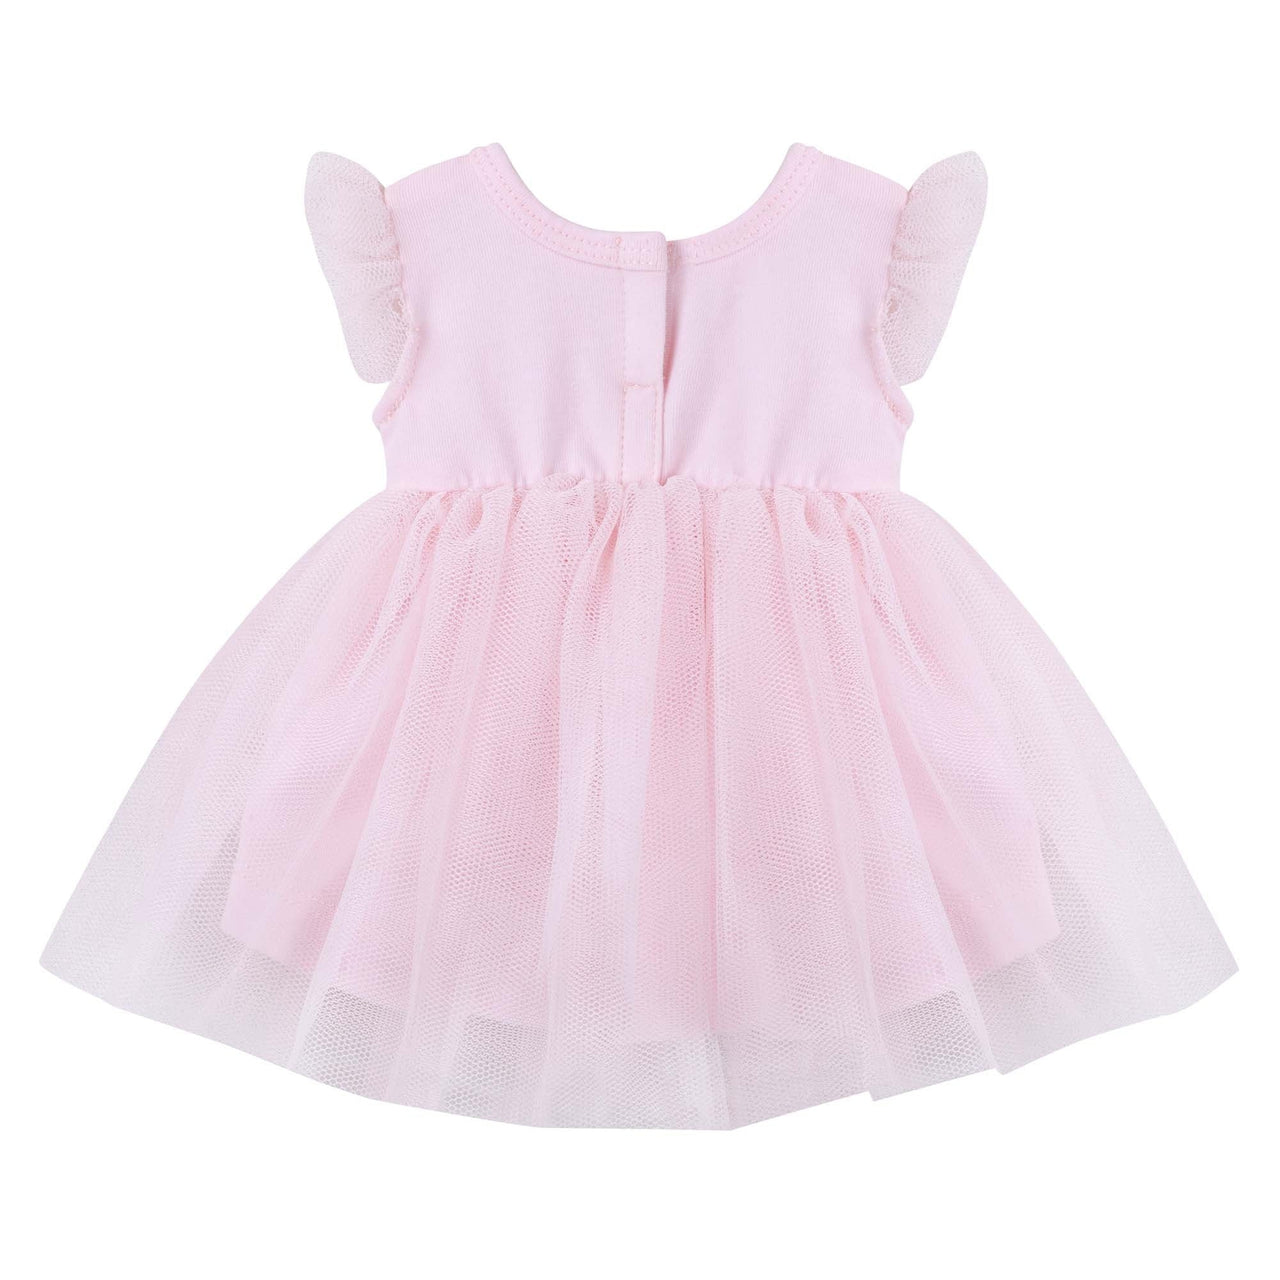 Solid Light Pink Dress with Tulle Skirt